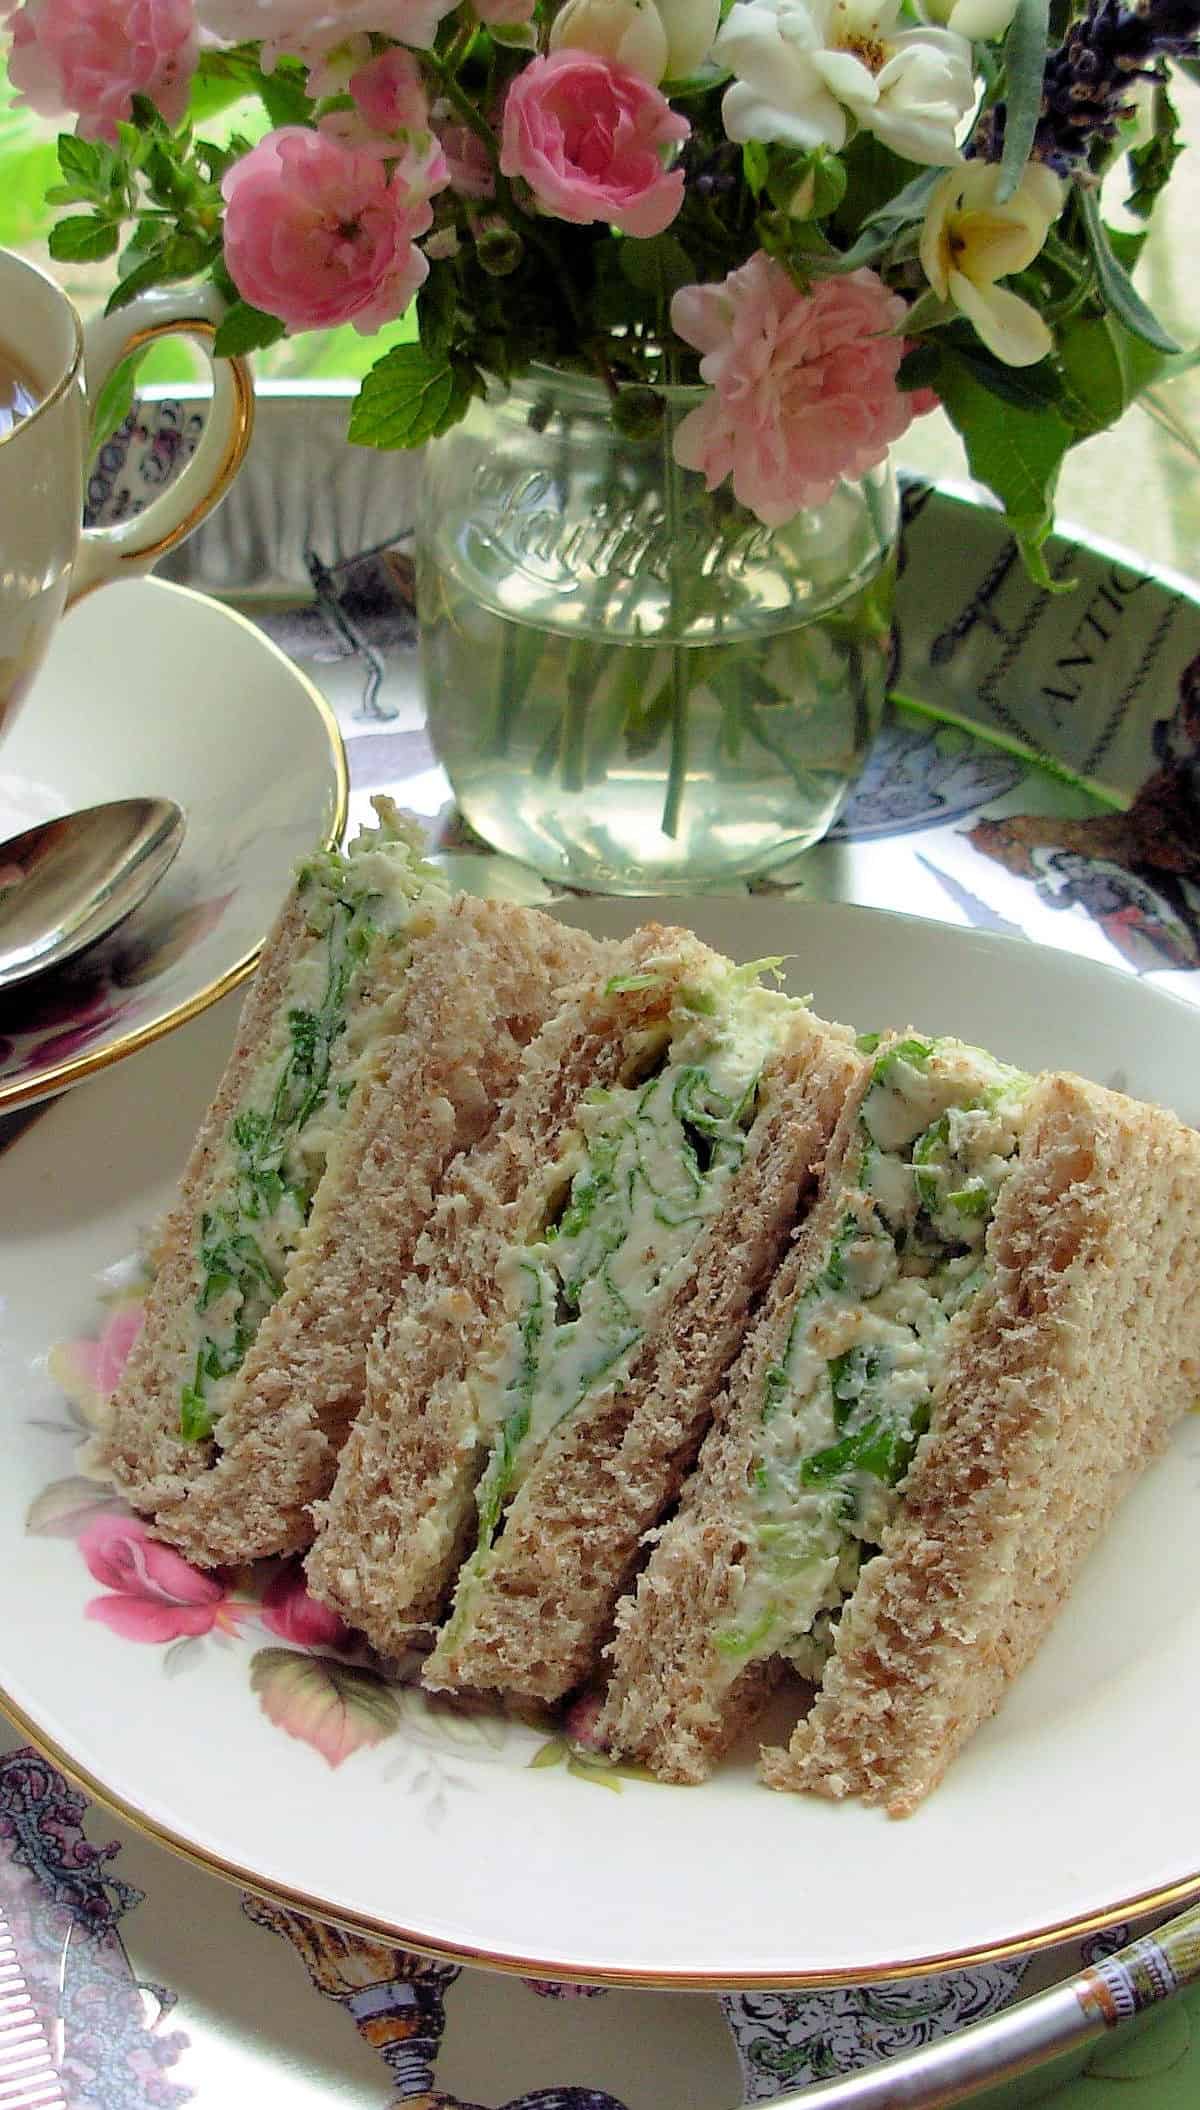  Delicious cream cheese tea sandwiches with a pop of green!